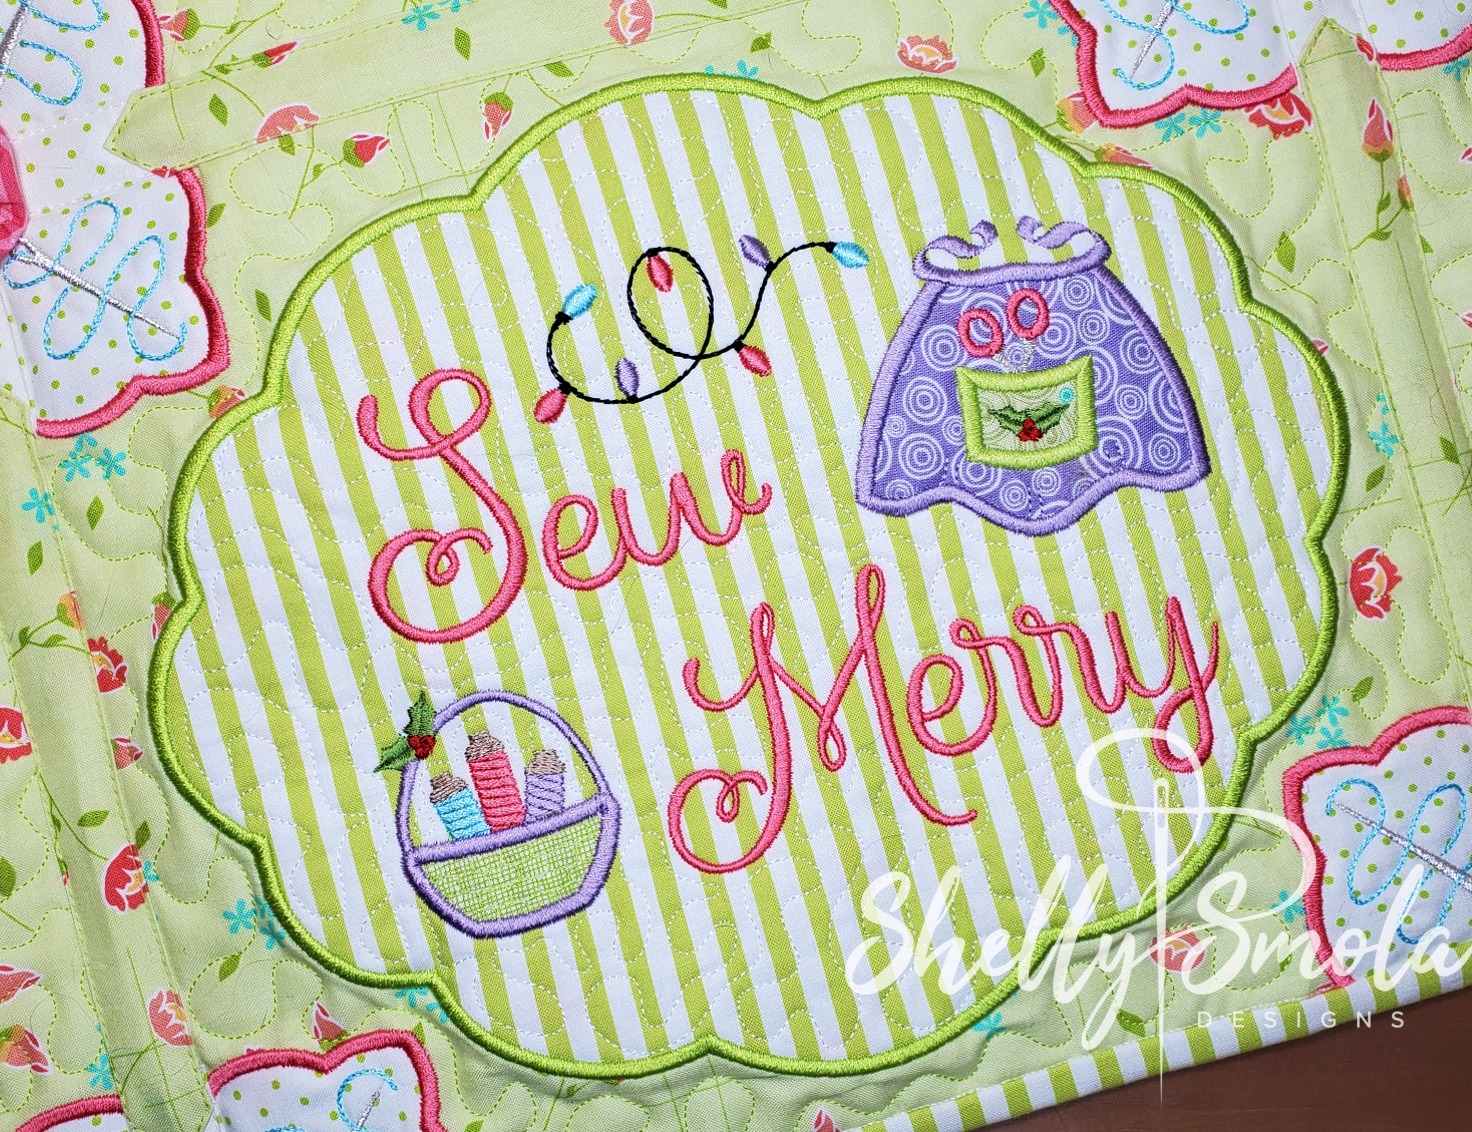 Sew Crazy - Sew Merry by Shelly Smola